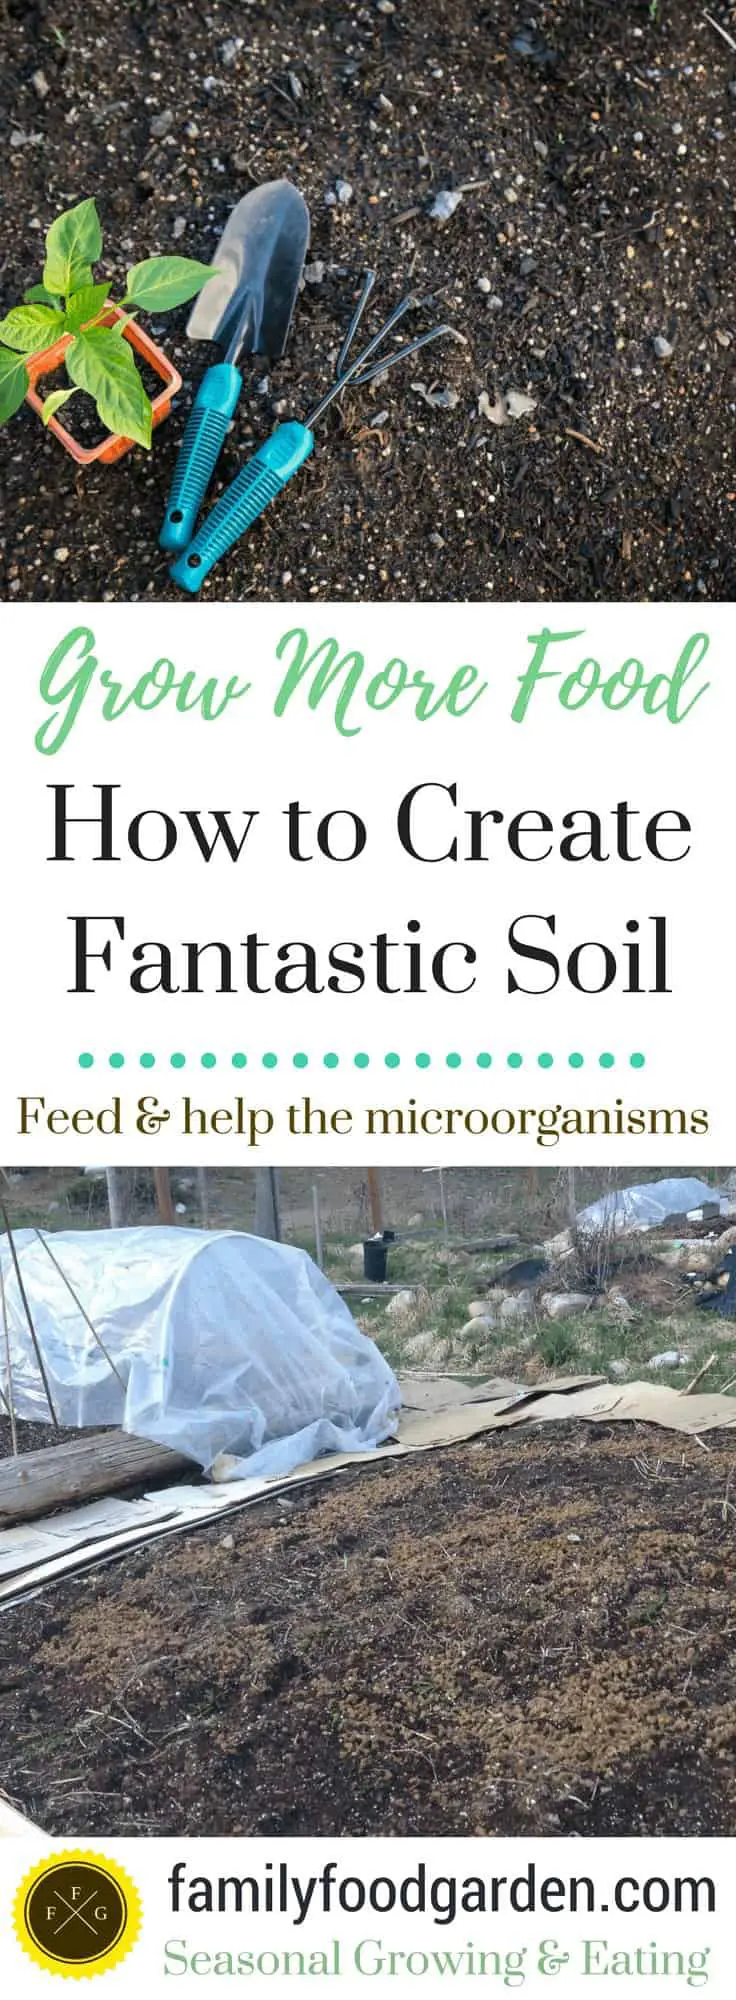 Grow More Food - How to Create Fantastic Soil